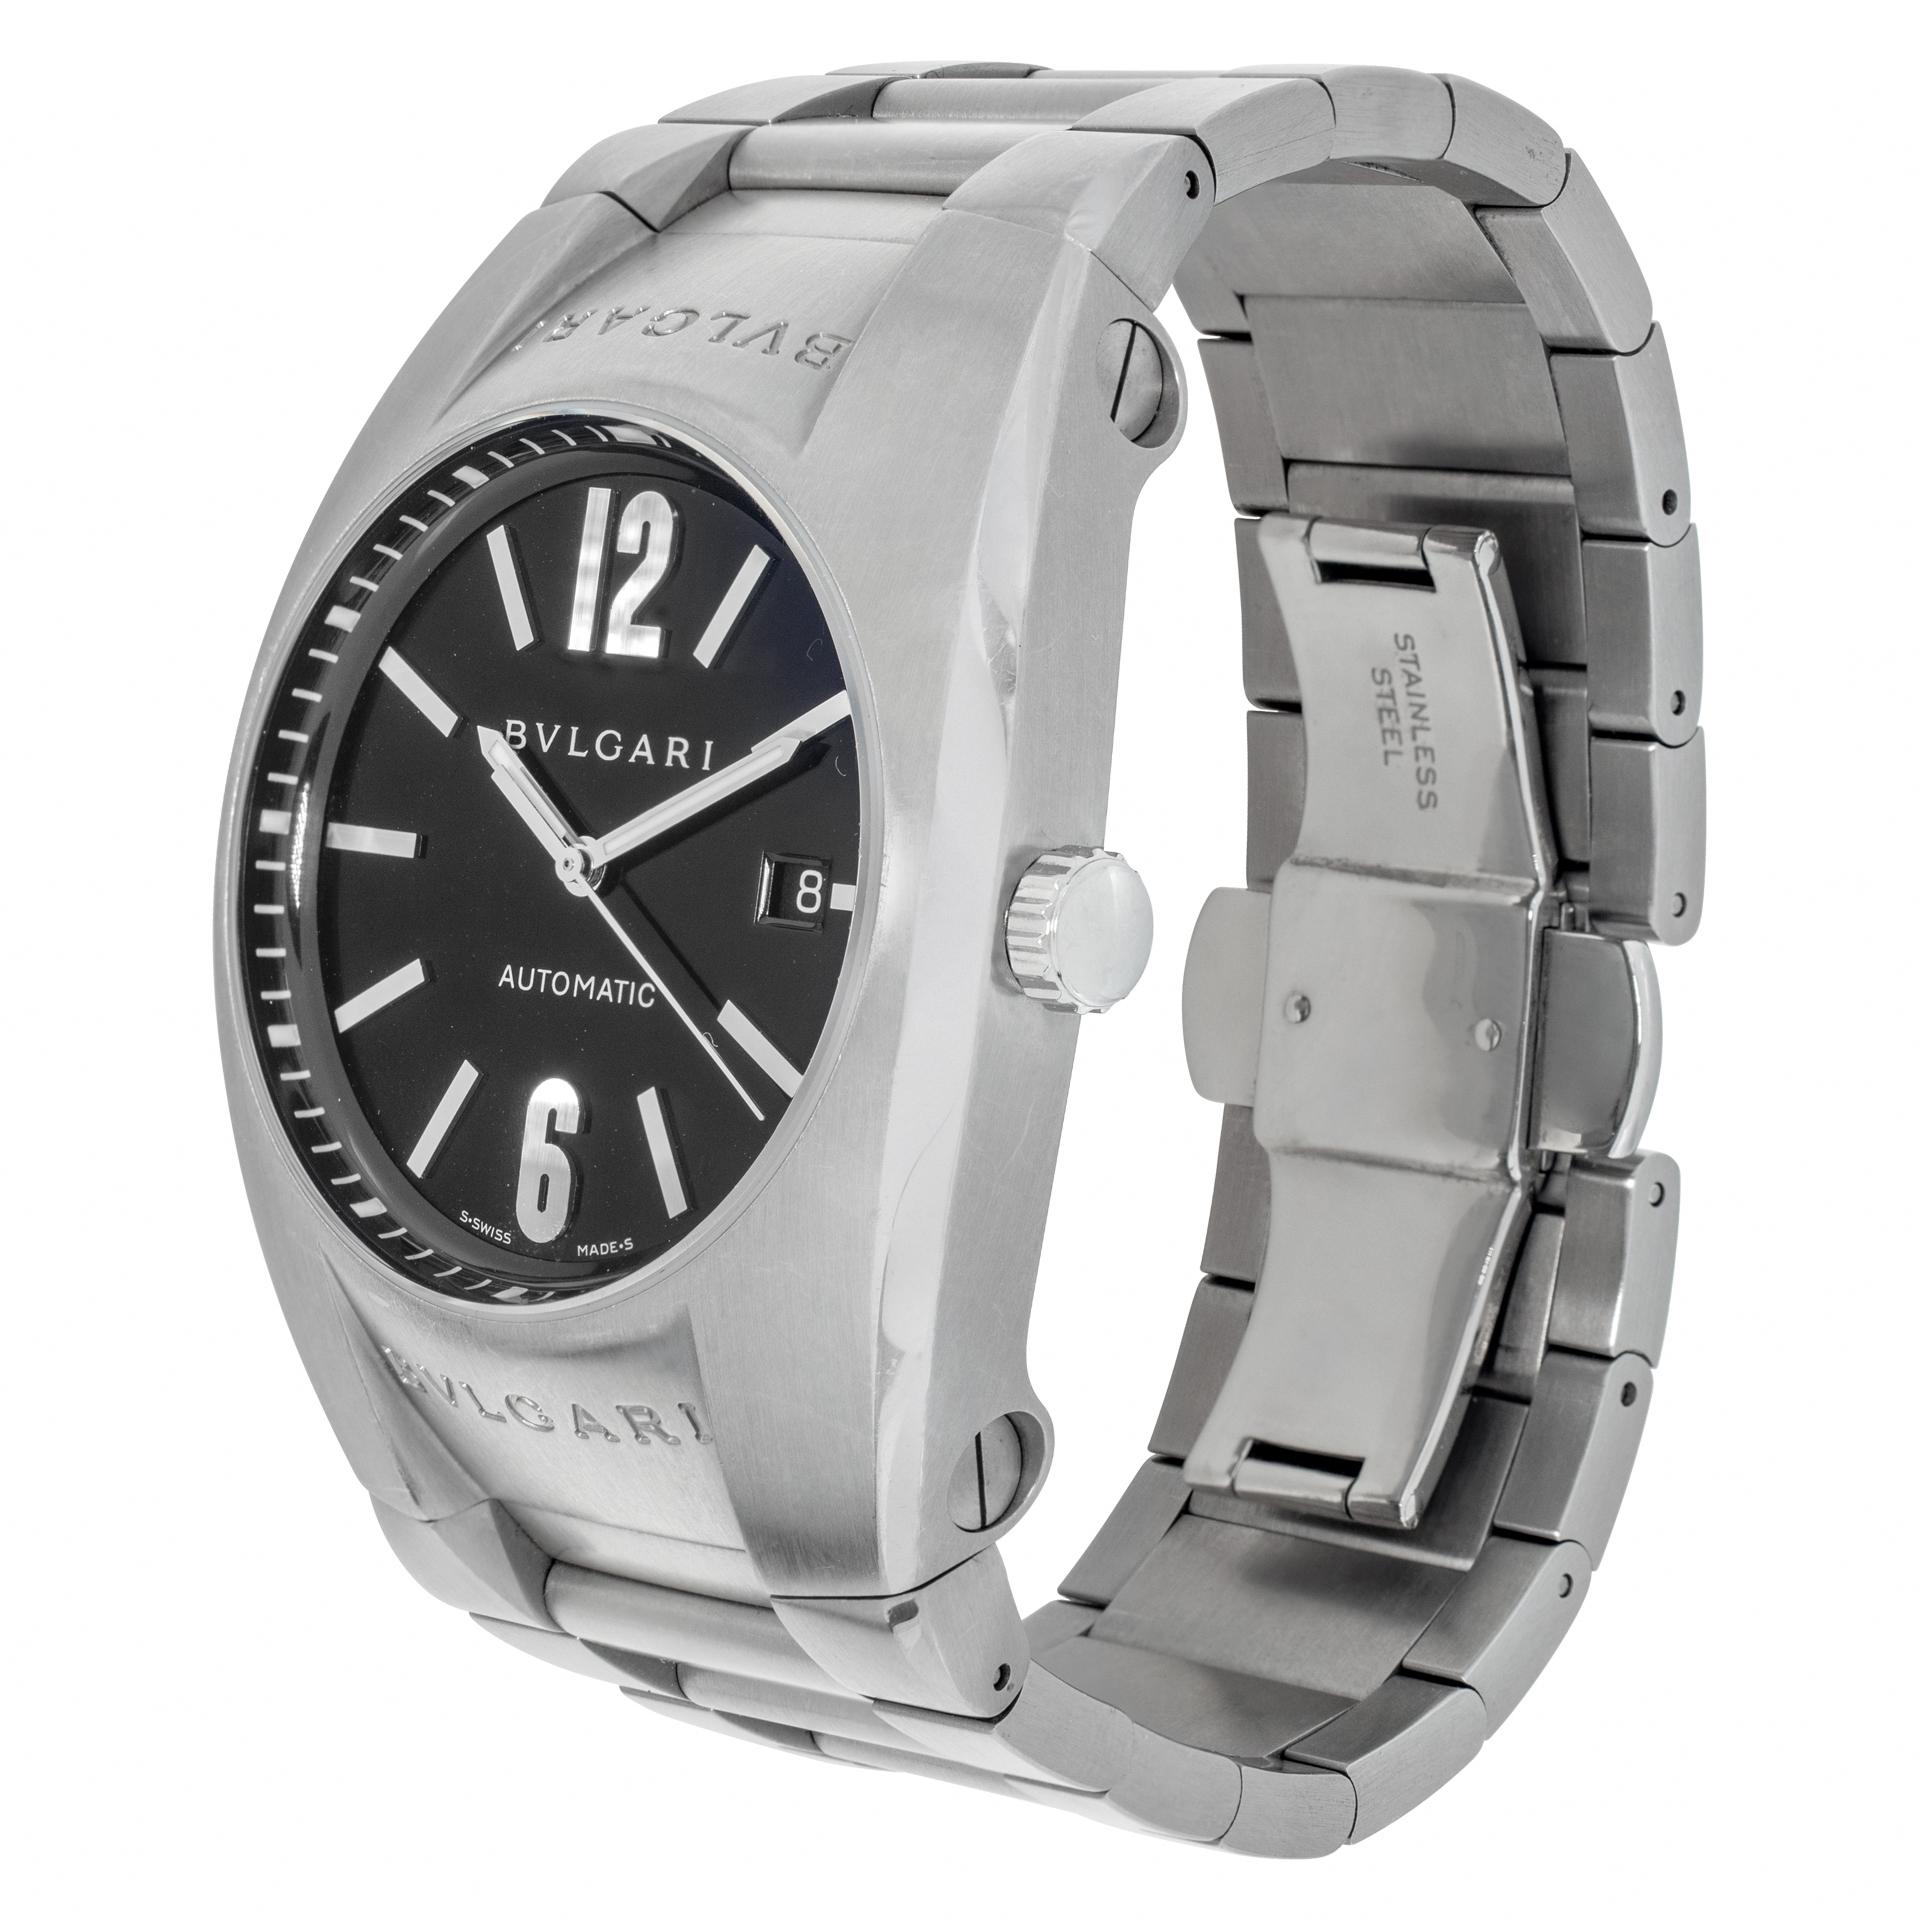 Bvlgari Ergon in stainless steel. Auto w/ sweep seconds and date. 40 mm case size. Ref eg40s. Fine Pre-owned Bvlgari / Bulgari Watch. Certified preowned Sport Bvlgari Ergon eg40s watch is made out of Stainless steel on a Stainless Steel bracelet